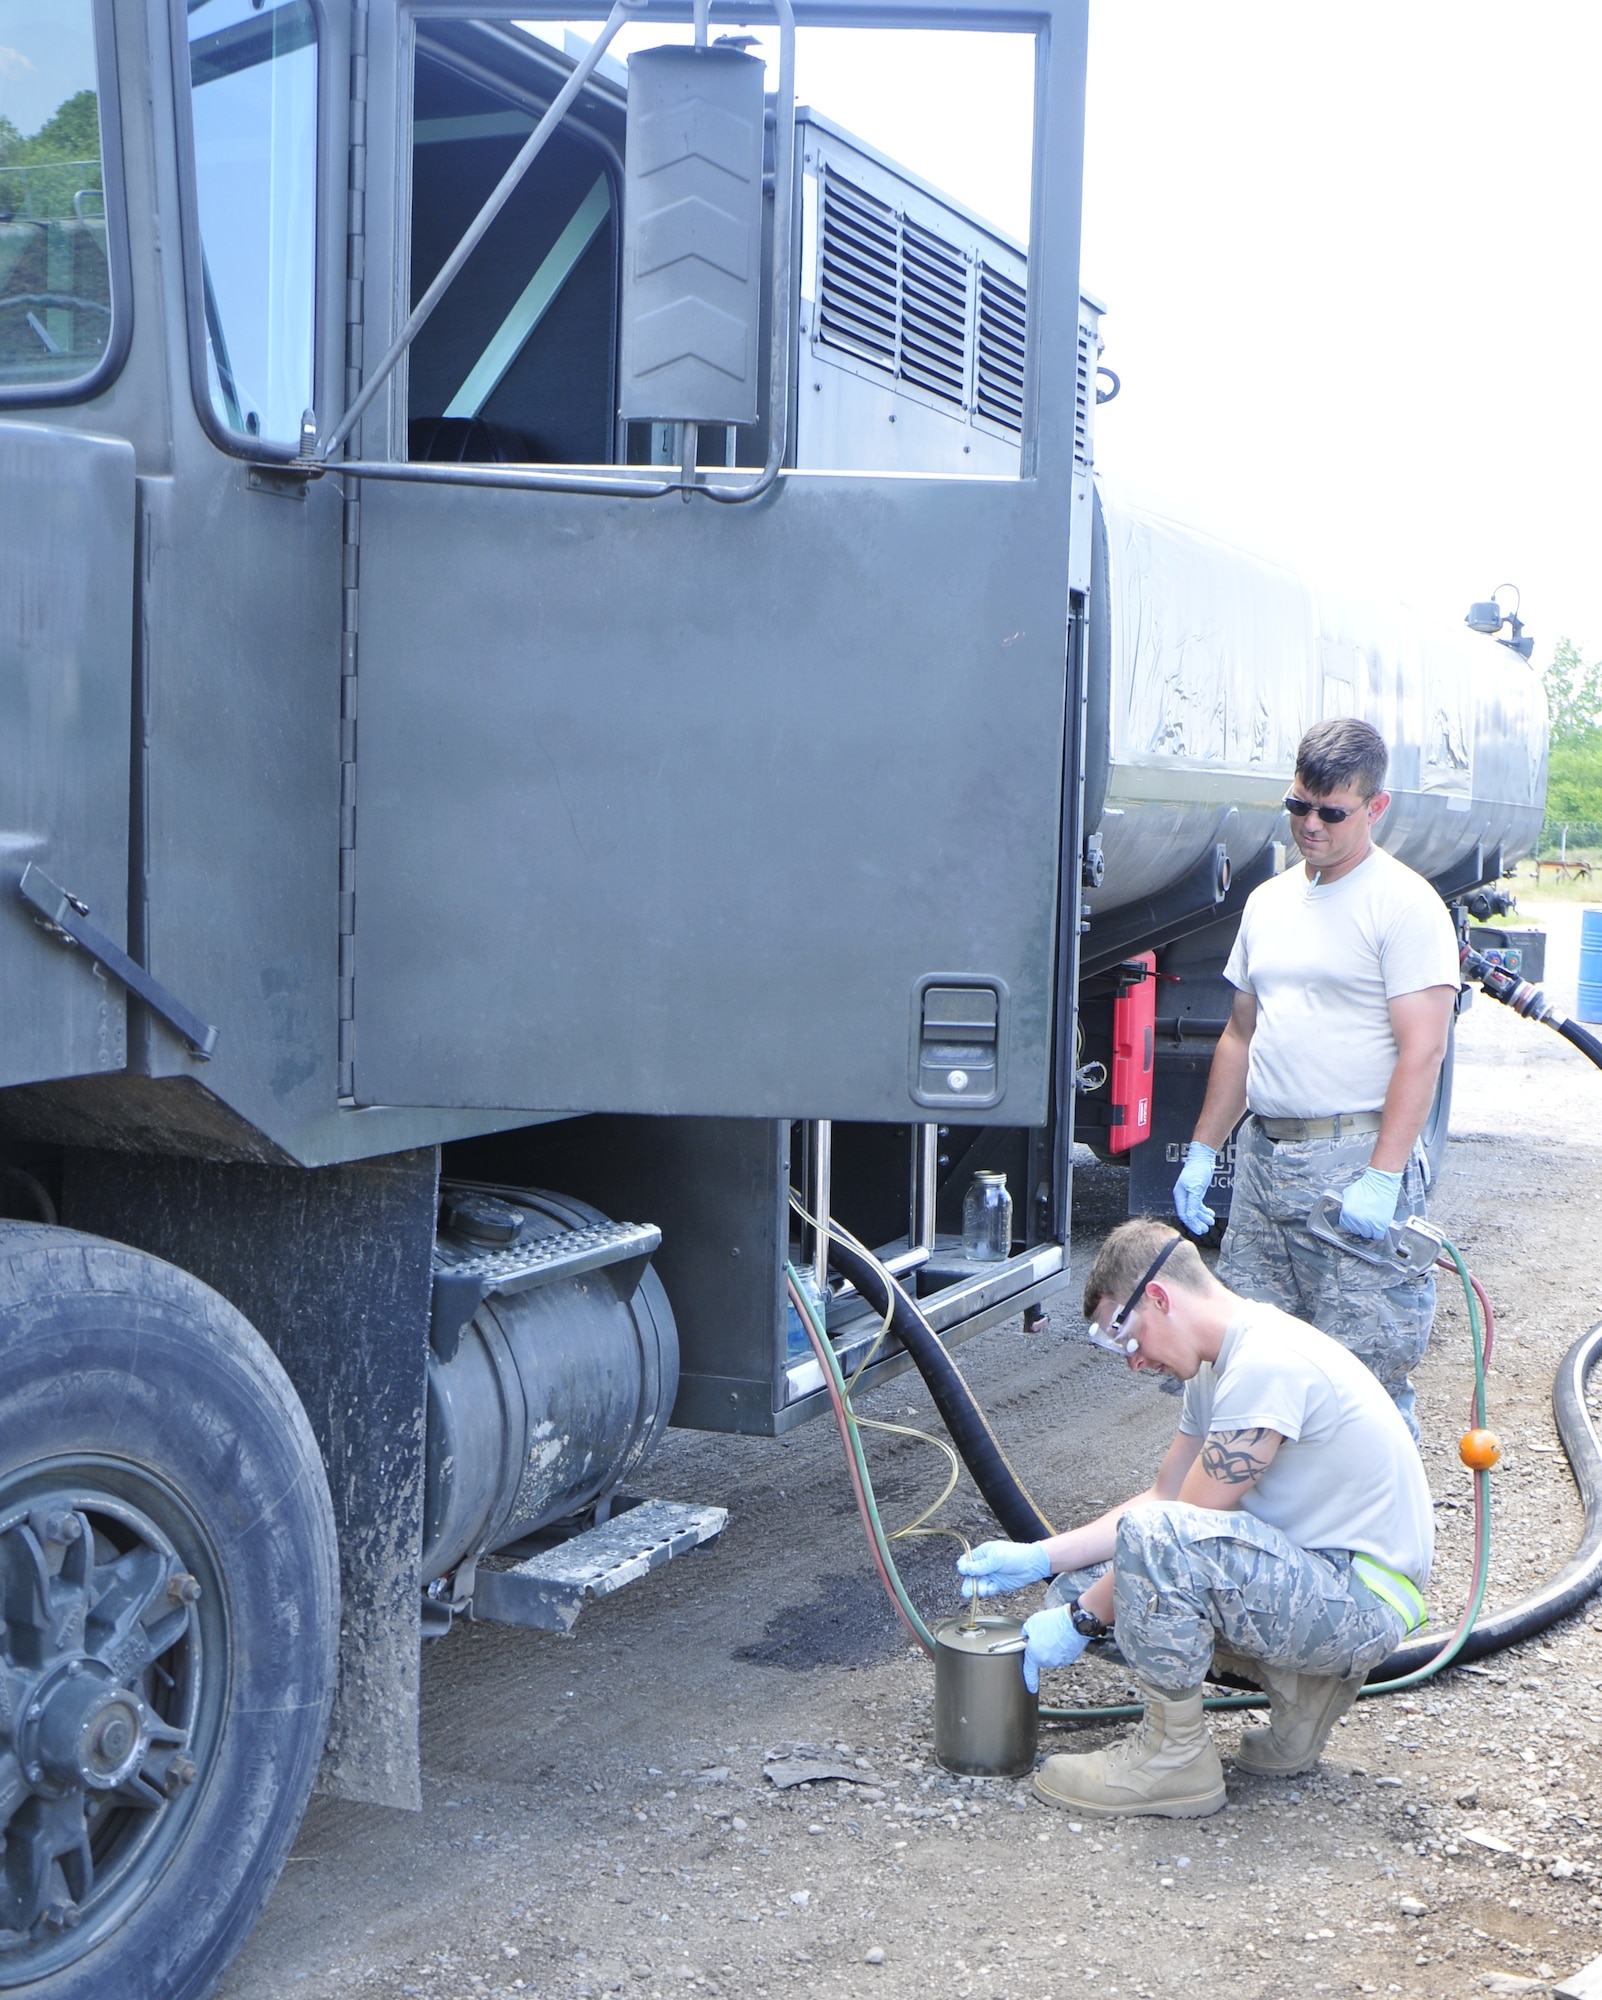 Senior Airman Wesley Anderson, 48th Logistics Readiness Squadron Petroleum, Oil and Lubricants lab technician, takes a fuel sample from the re-fueling truck as Tech. Sgt. Jackie Highlander, 48th Logistics Readiness Squadron Petroleum, Oil and Lubricants fuels, environmental and compliance inspector, oversees at Graf Ignatievo Air Force Base, Bulgaria, May 25. Samples are taken to ensure that the fuel has been successfully transformed from Jet A1 fuel to JP-8. Airman Anderson and Sergeant Highlander are part of the group of Airmen who are here to help integrate the Bulgarian air force into NATO and to build partnership capacities between the two air forces. (U.S. Air Force photo/Airman 1st Class Tiffany M. Deuel)